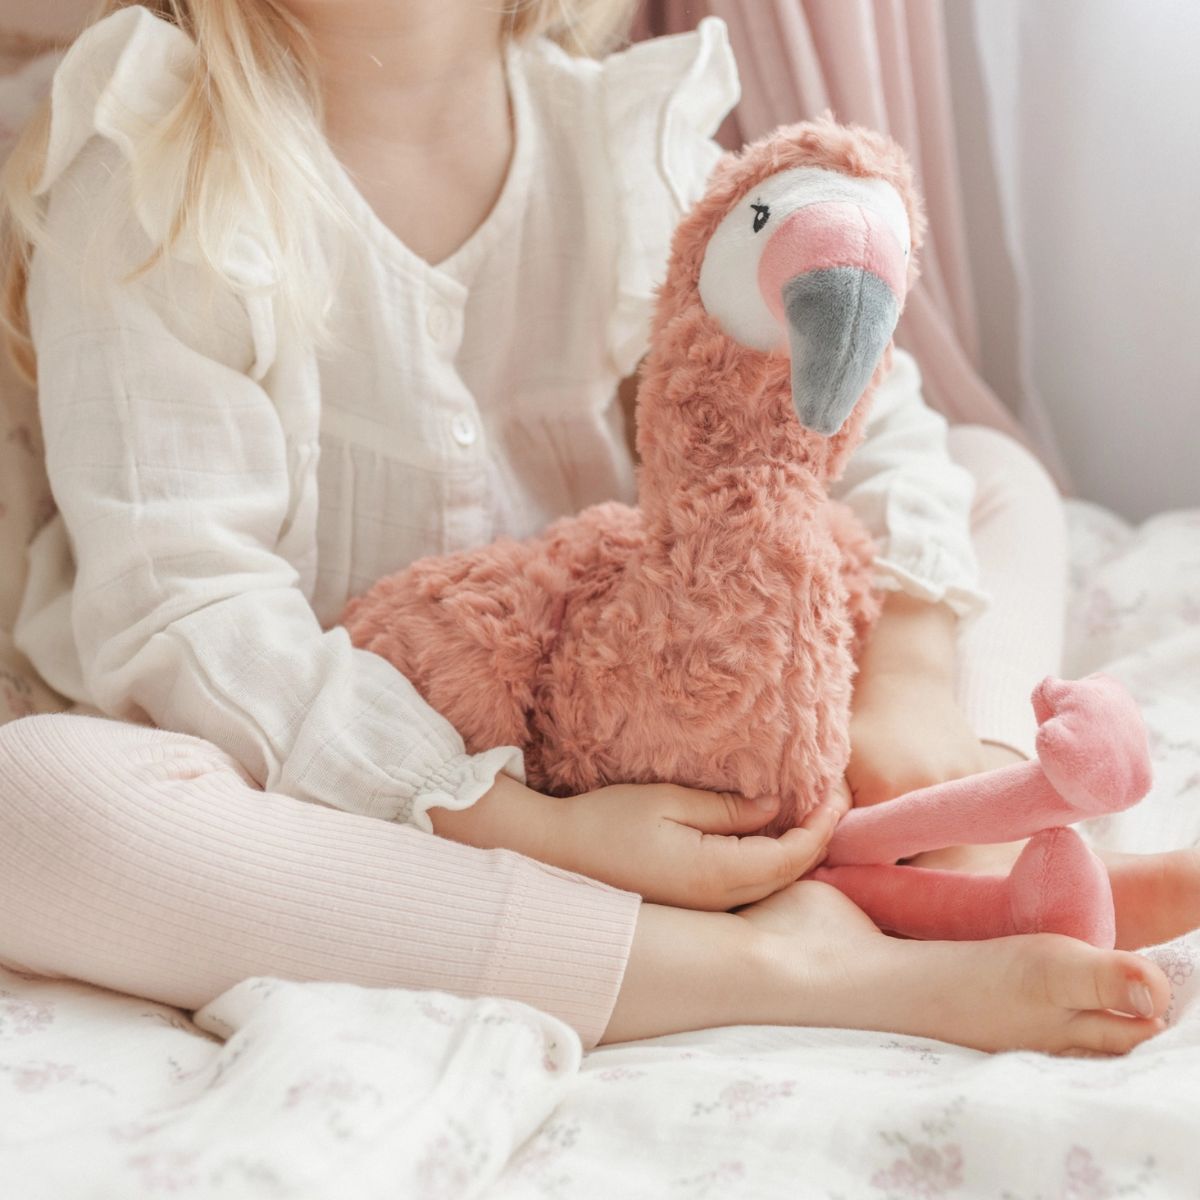 Francesca the Flamingo Weighted Toy - Ultimate Sensory Toy for Kids